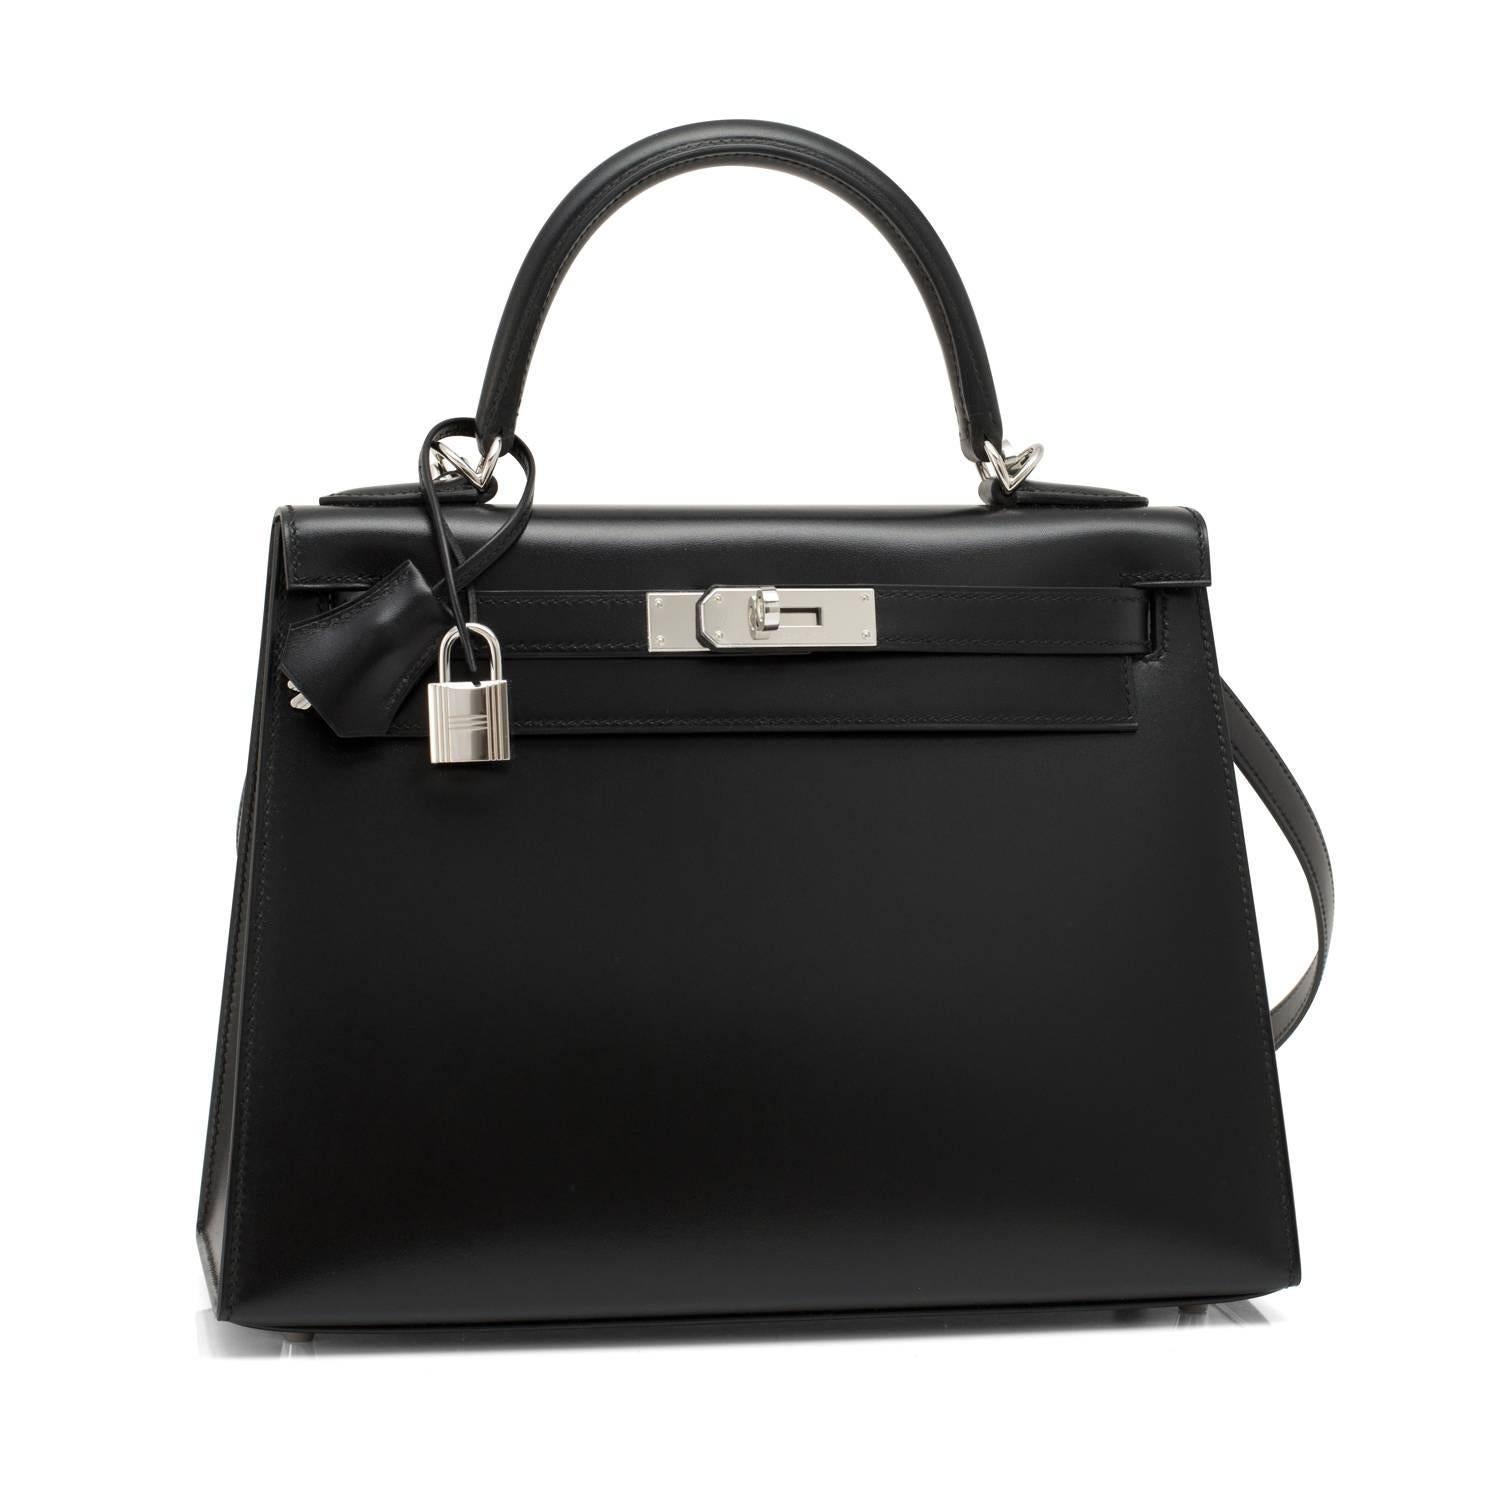 X Stamp Hermes Black Box Kelly 28cm Sellier Palladium Hardware Unicorn
Brand New in Box.  Store Fresh.  Pristine Condition (with plastic on hardware)
Perfect gift!  Comes full set with keys, lock, clochette, shoulder strap, a sleeper for the bag,